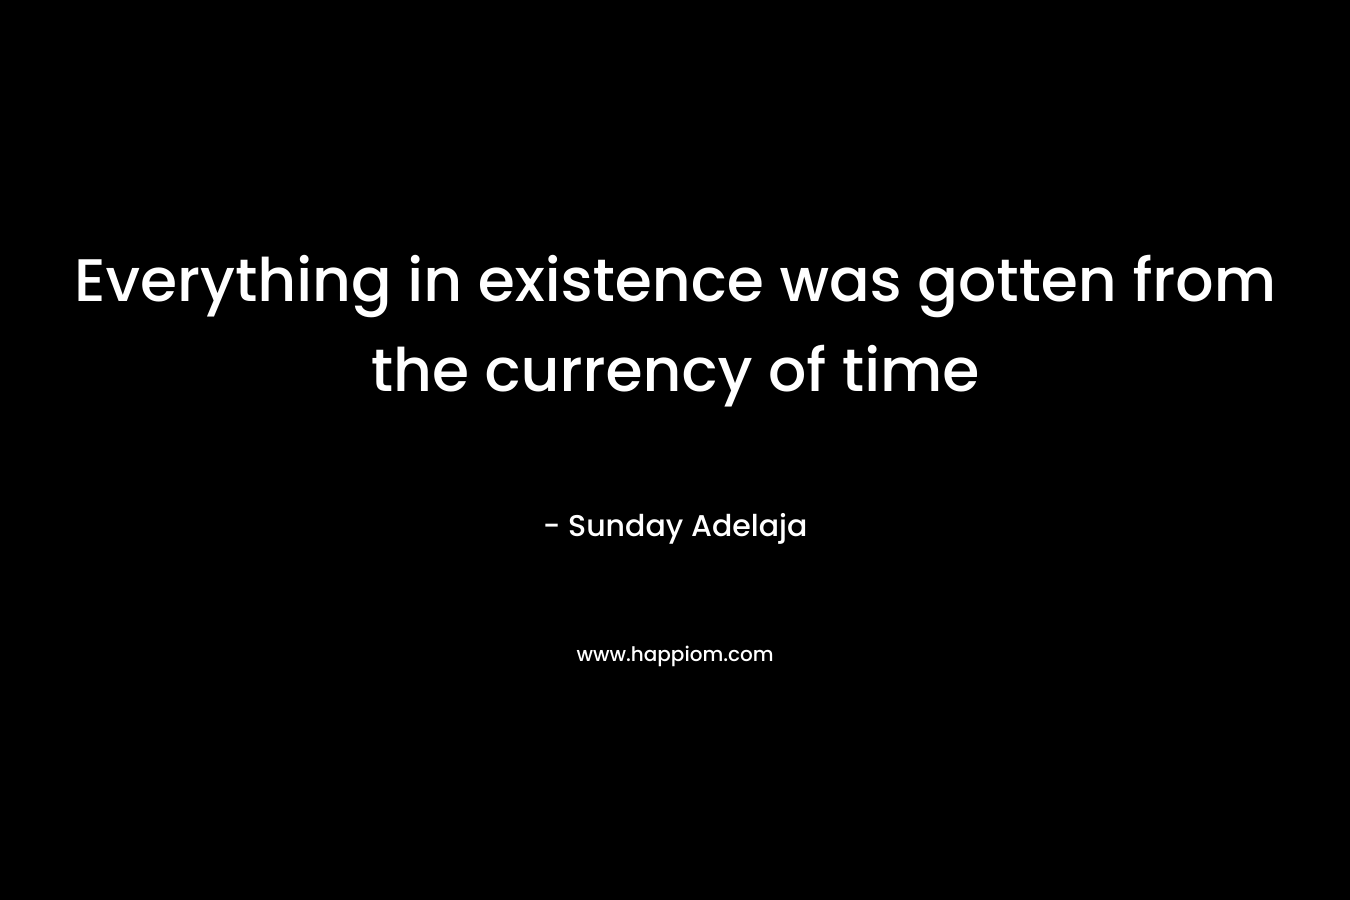 Everything in existence was gotten from the currency of time